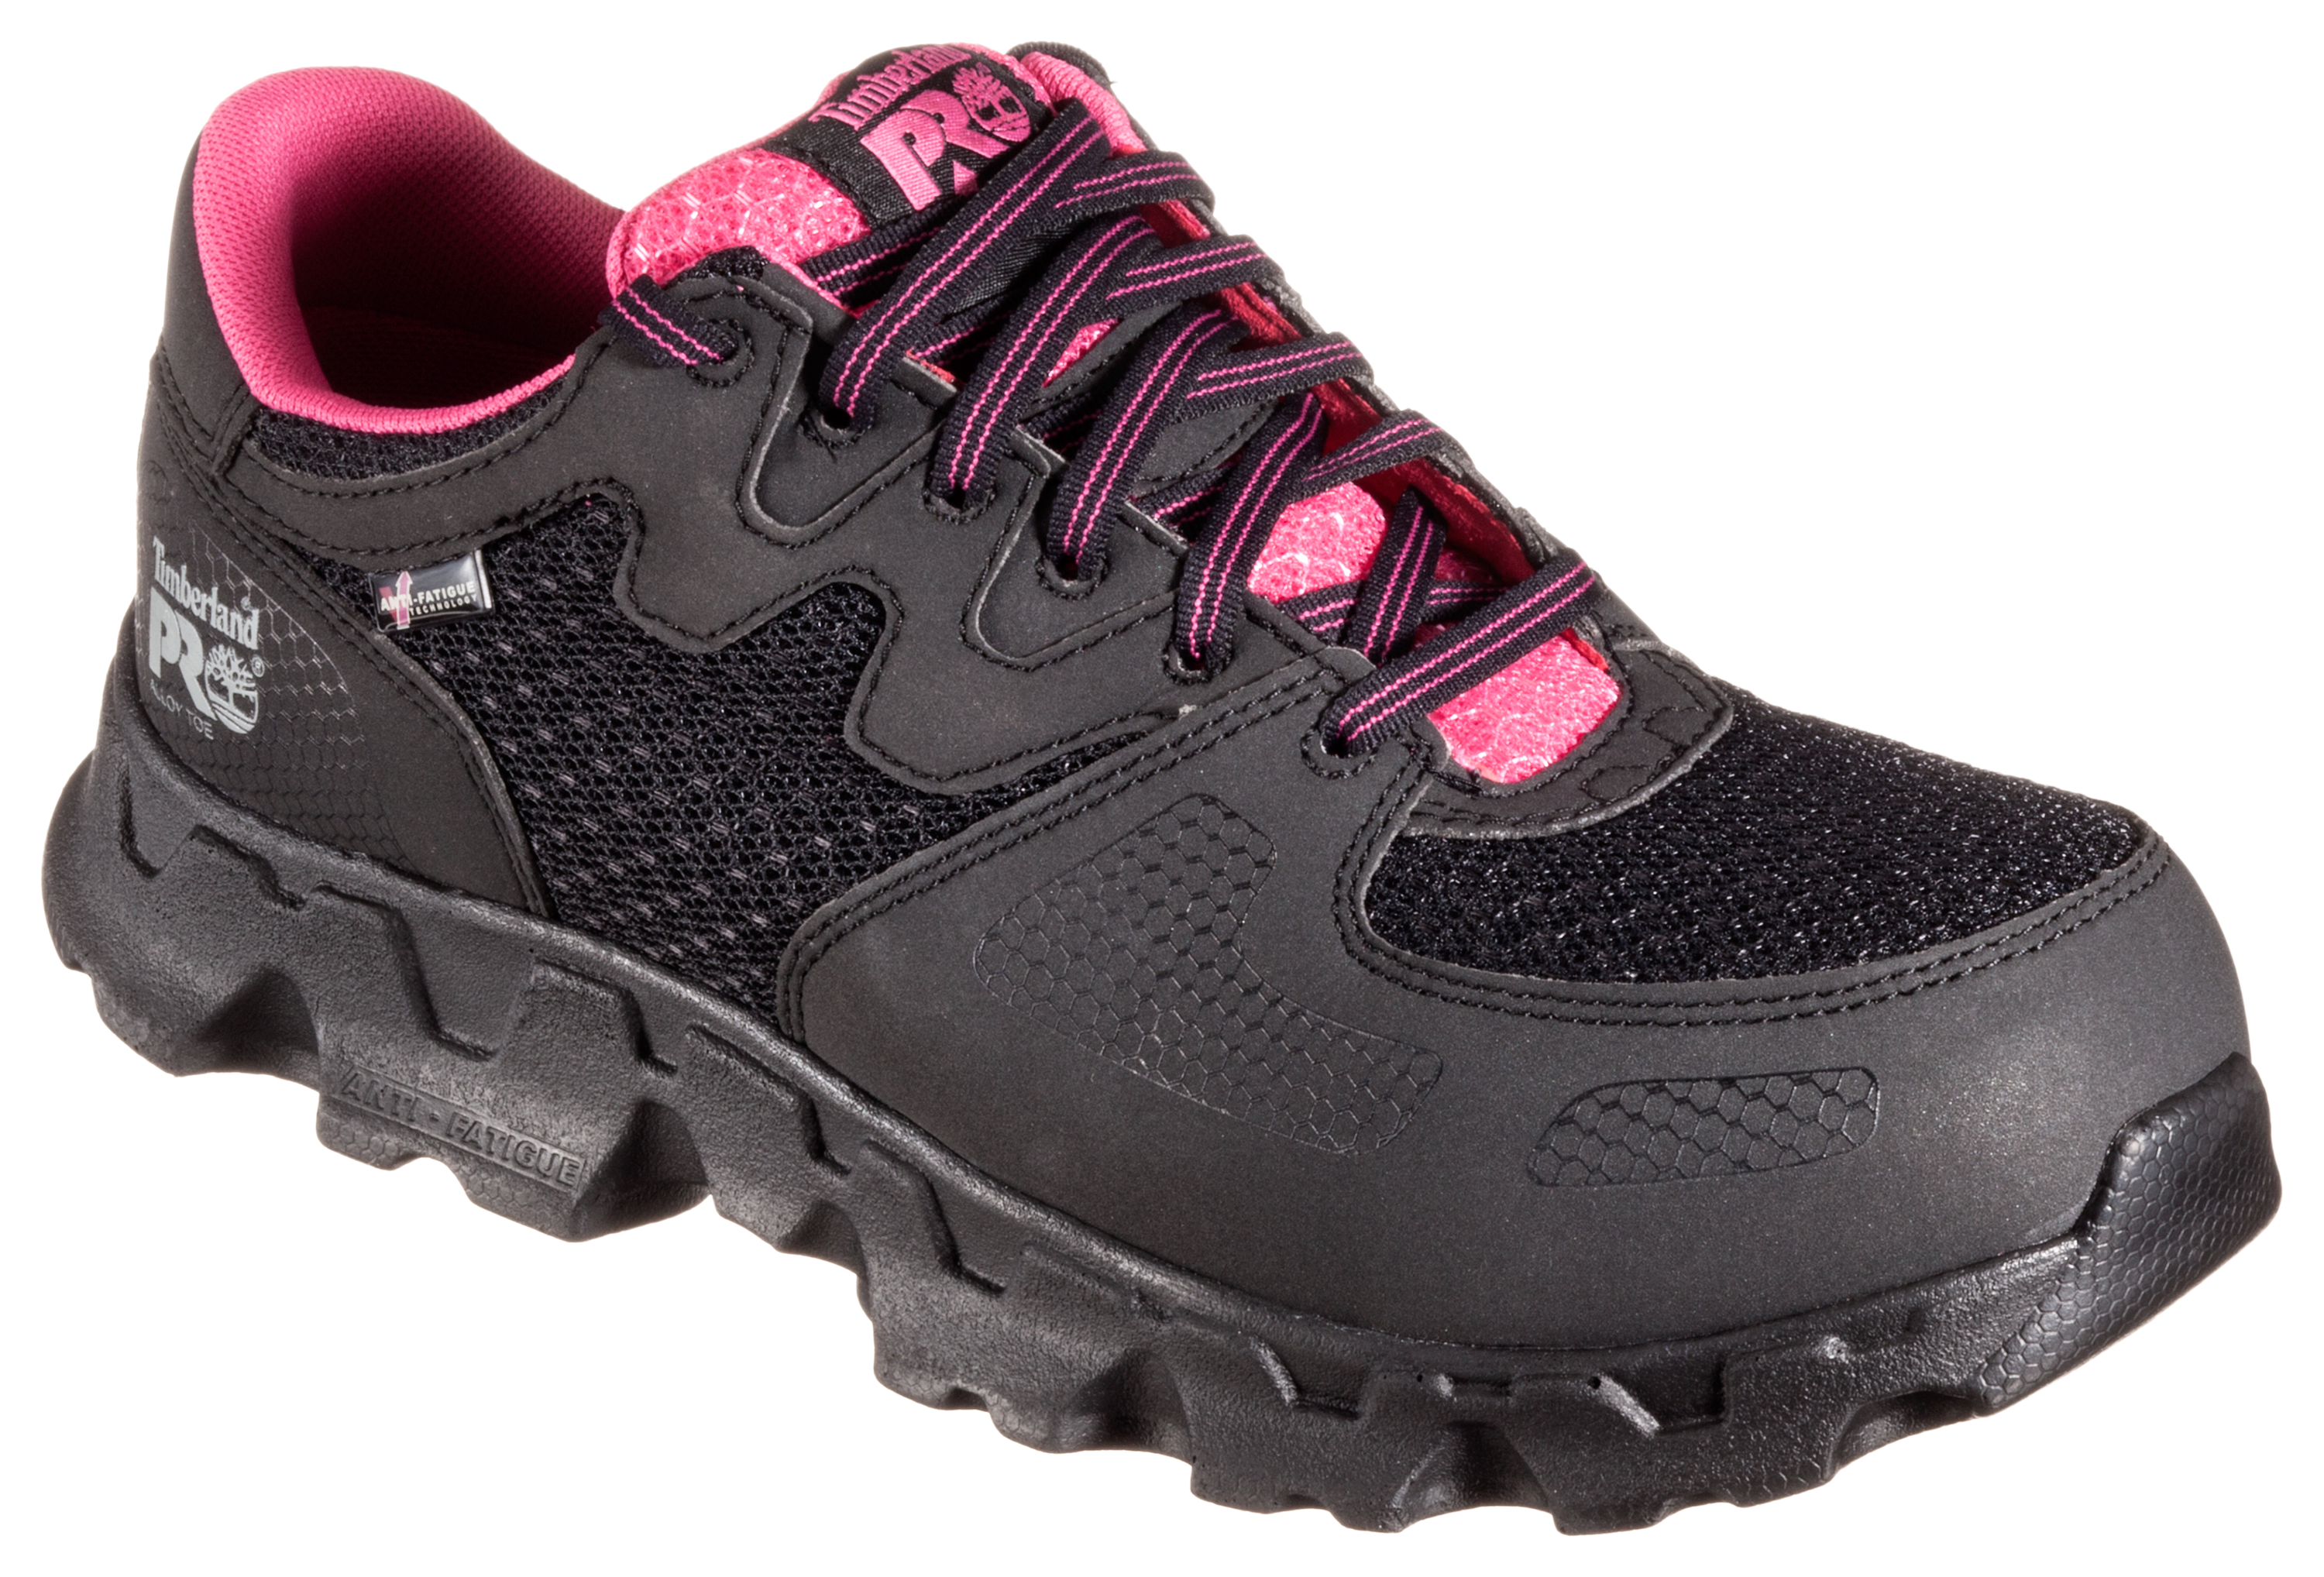 Timberland PRO Powertrain ESD Safety Toe Work Shoes for Ladies | Bass ...